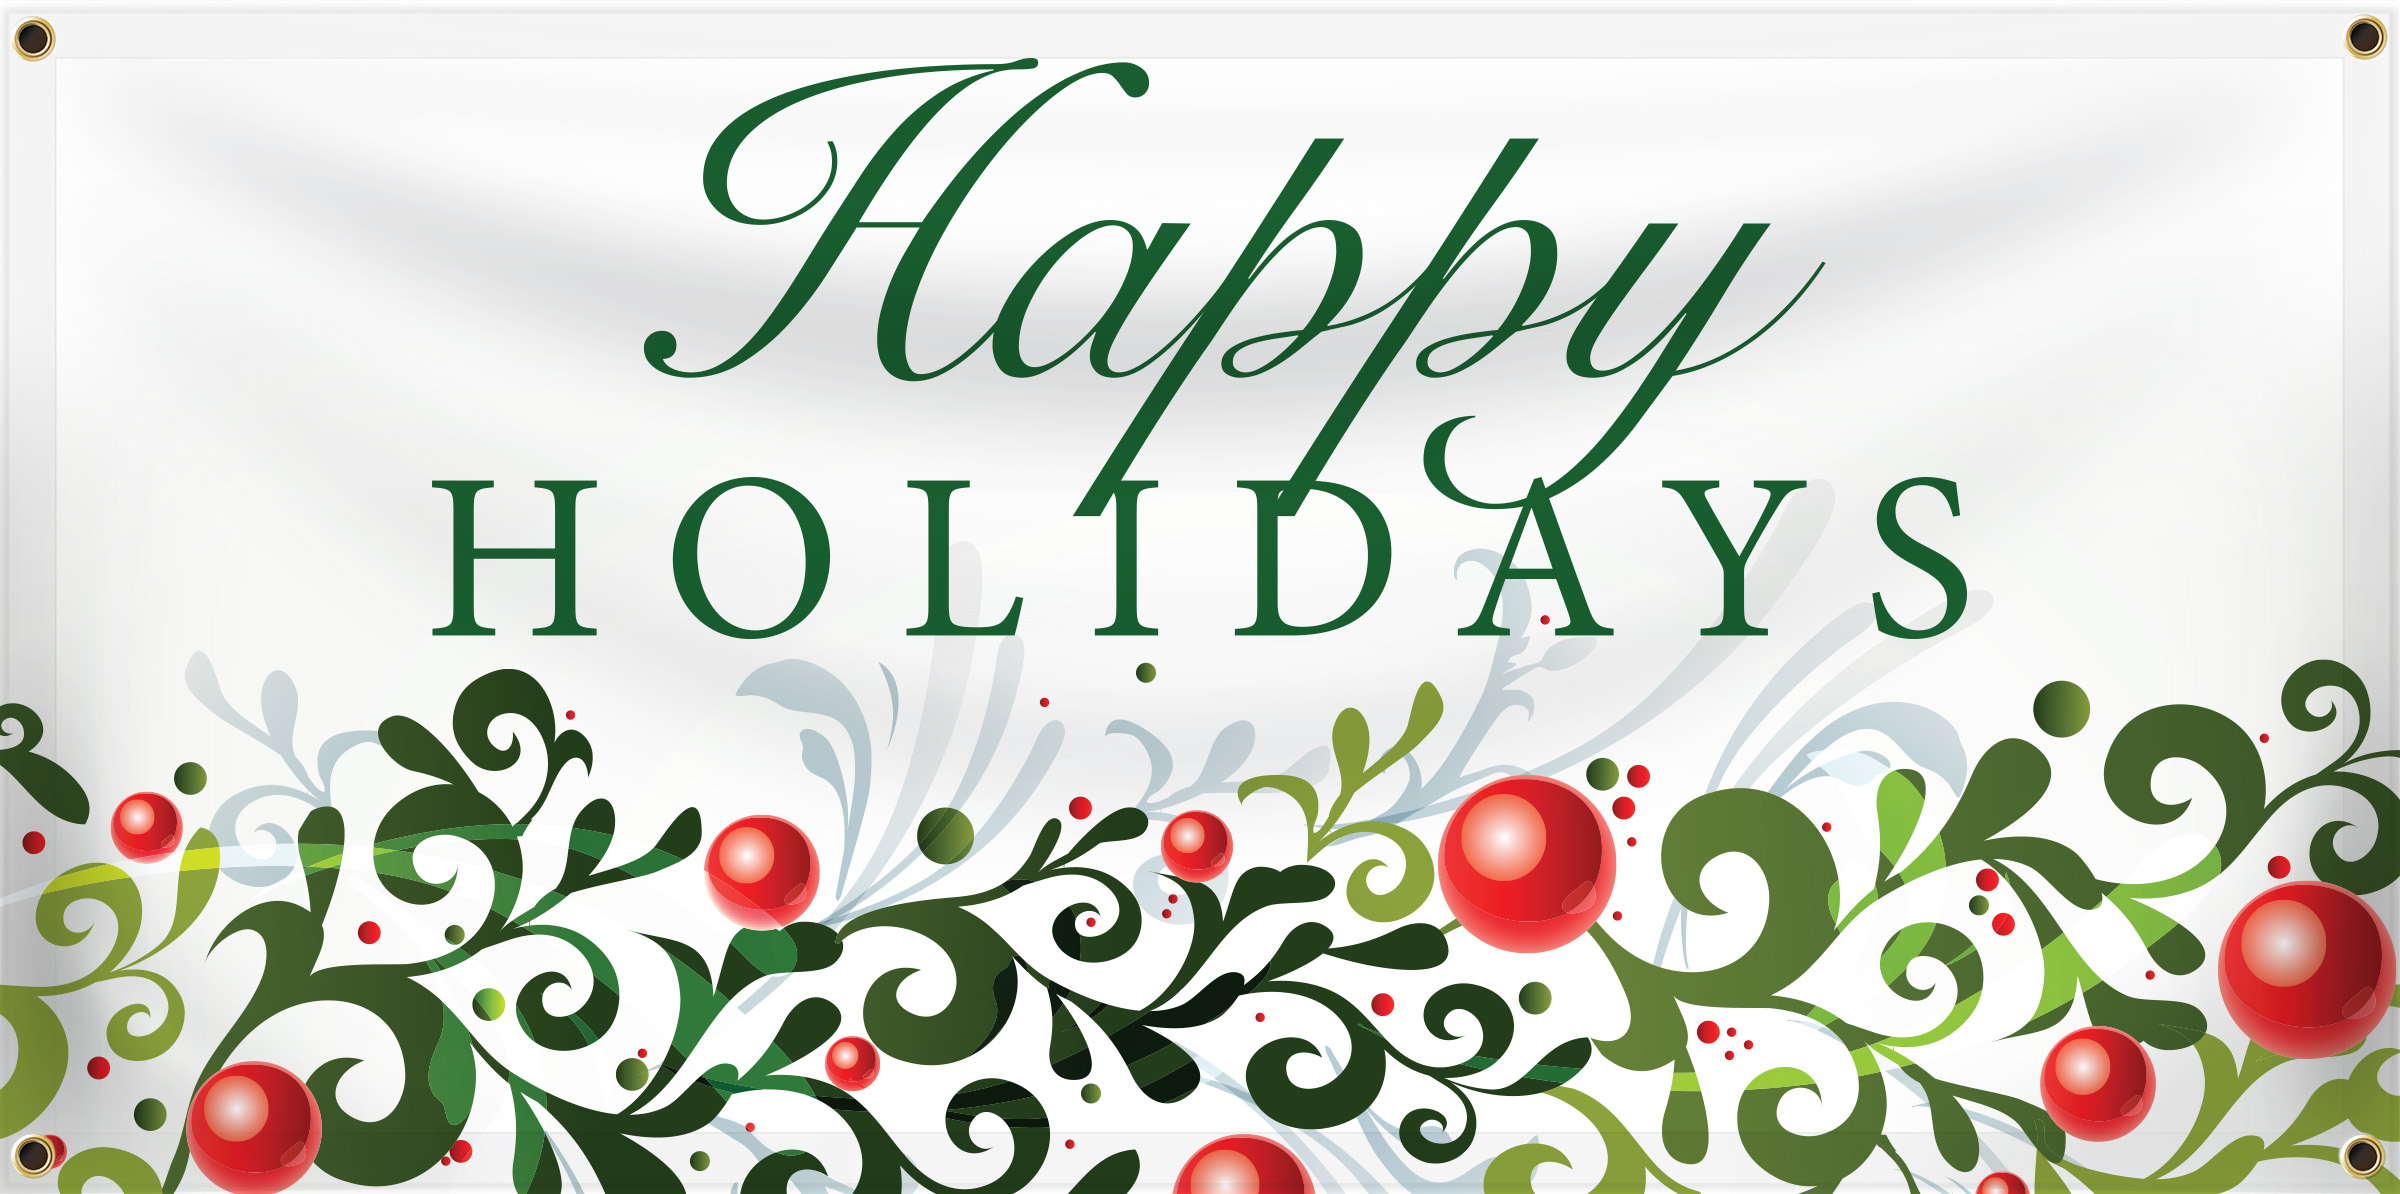 Happy Holidays Banner | LawnSigns.com